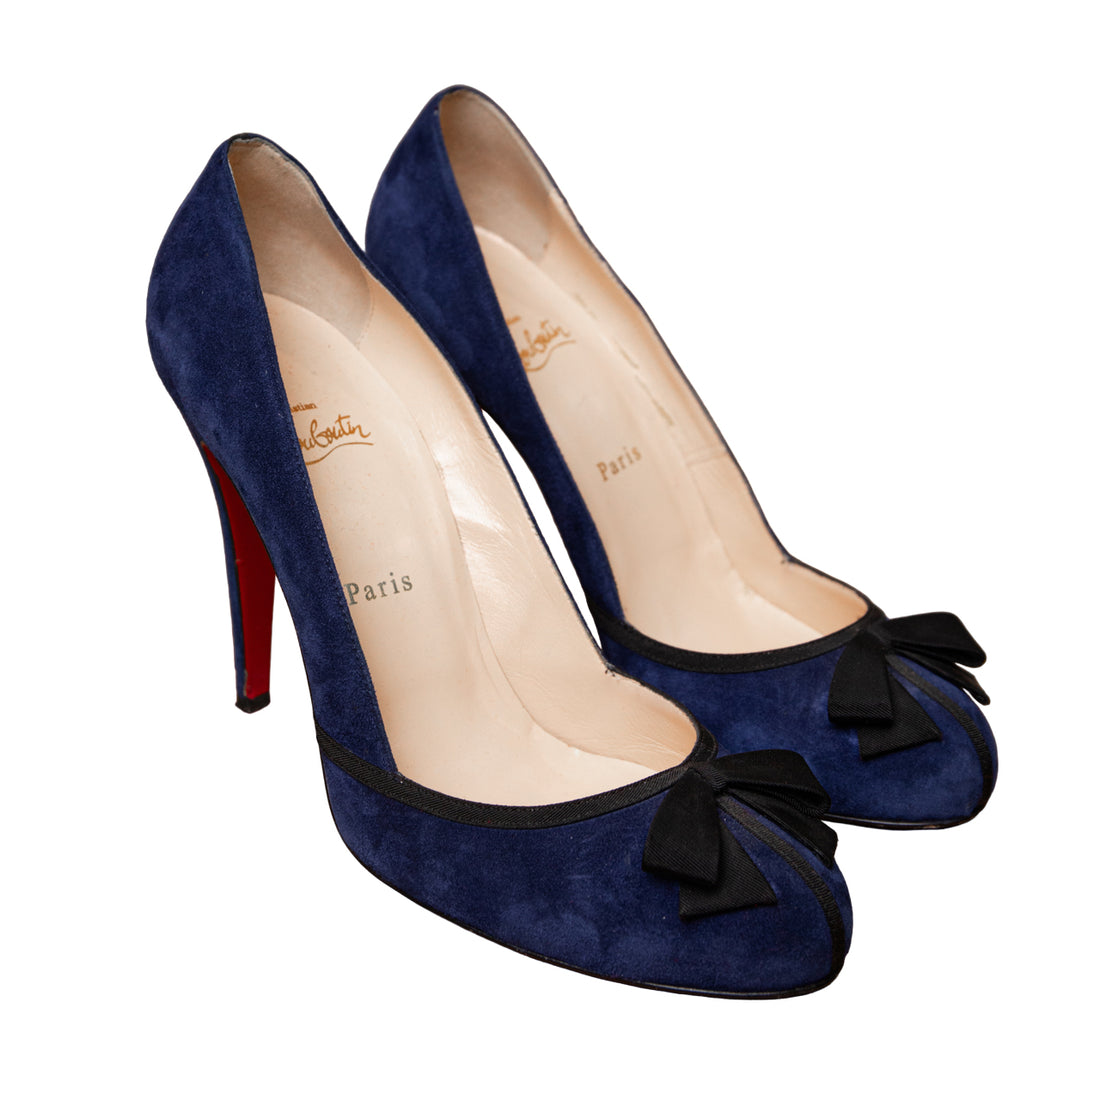 Christian Louboutin pumps in suede with bow details